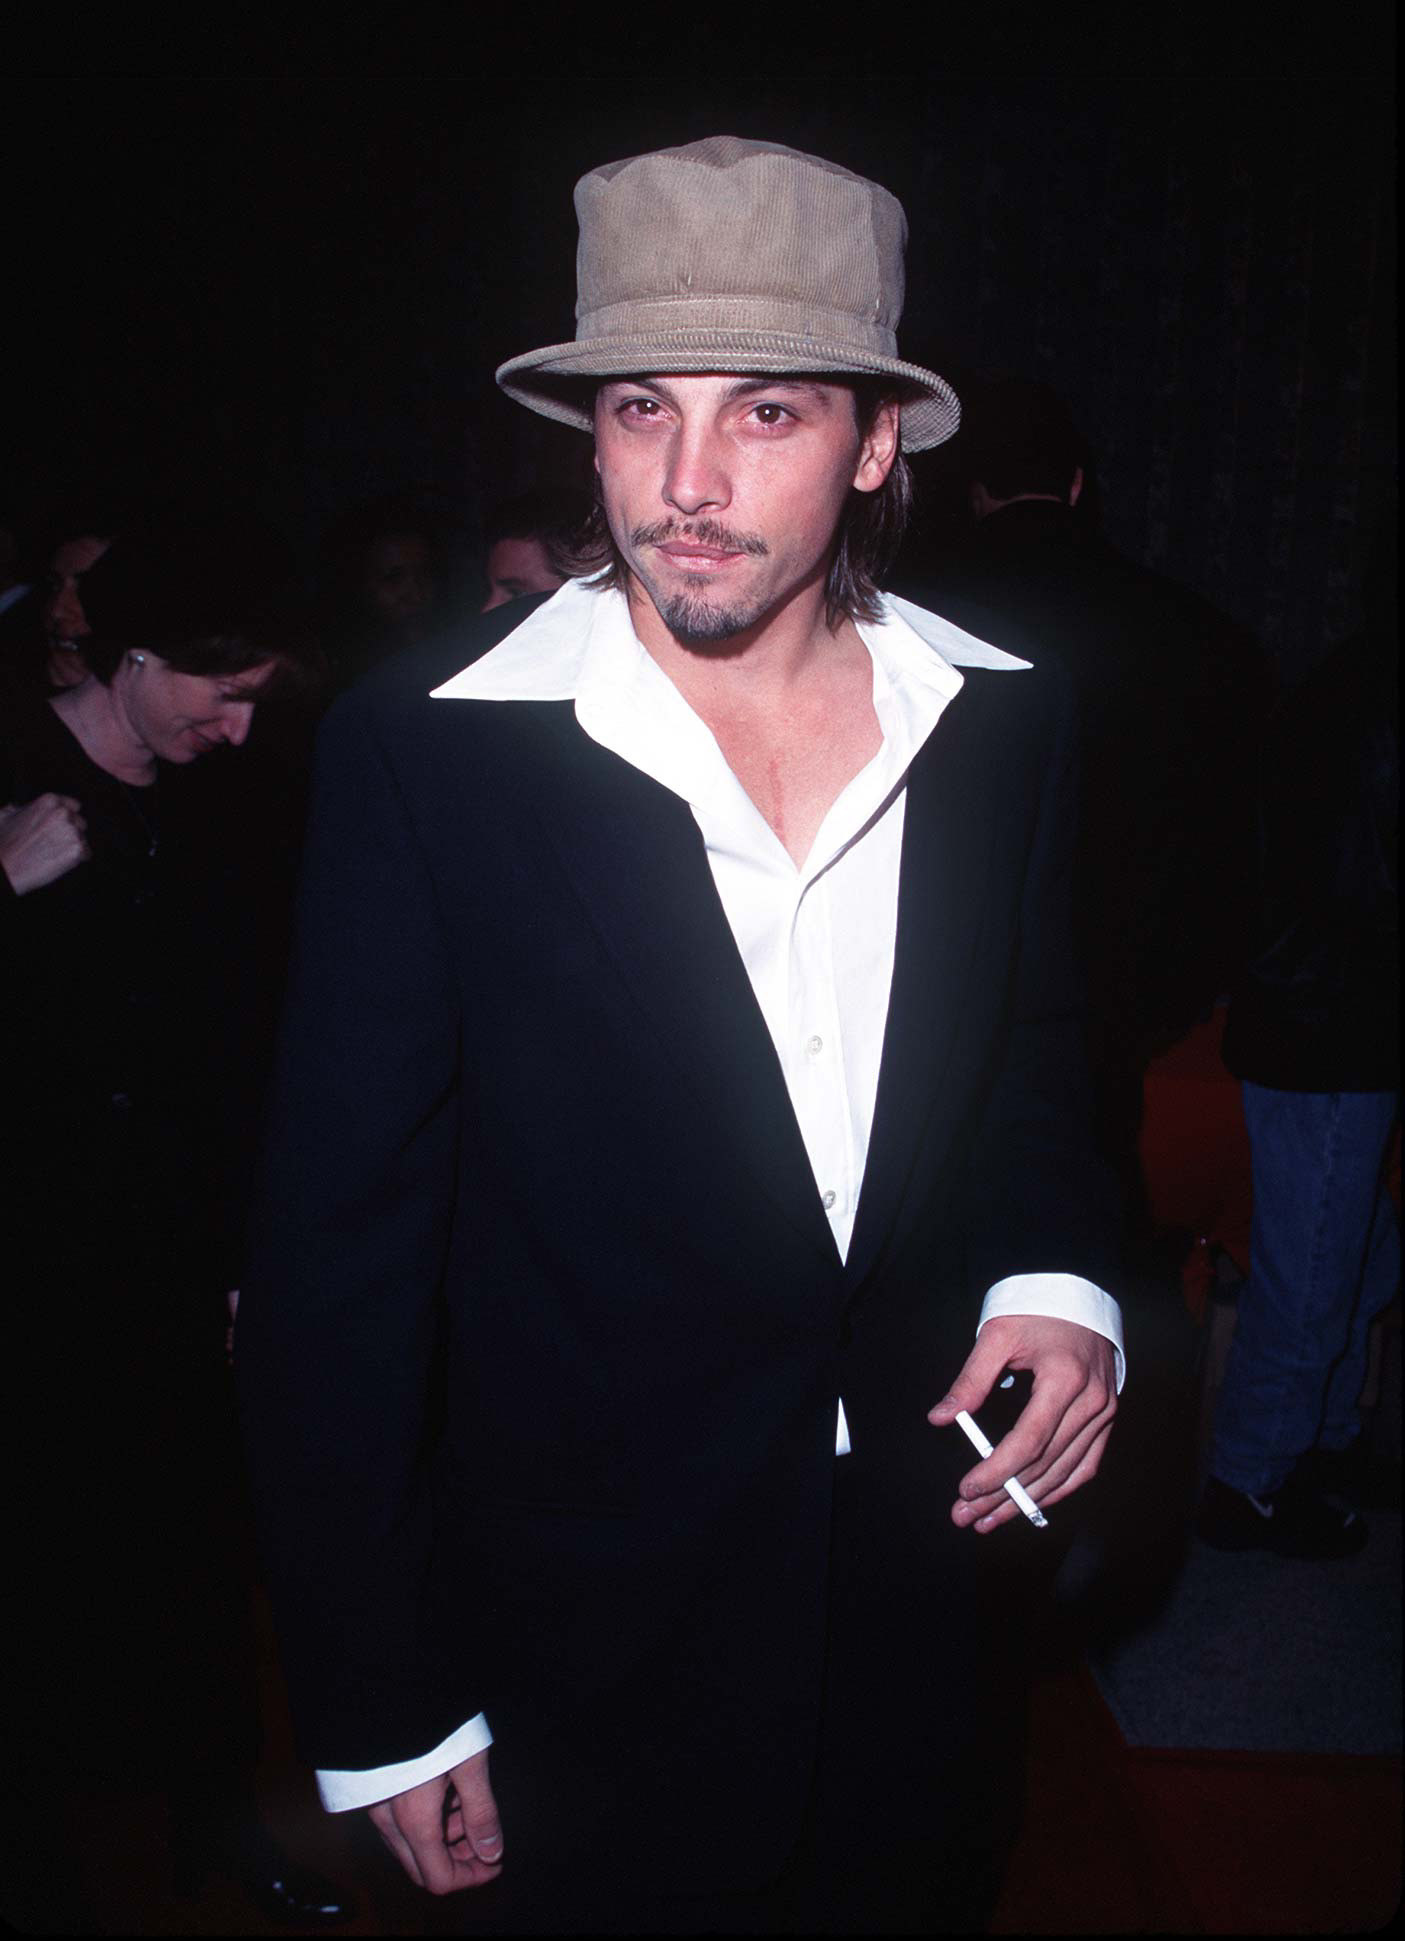 Skeet Ulrich in a bucket hat and black suit and white shirt with a giant collar